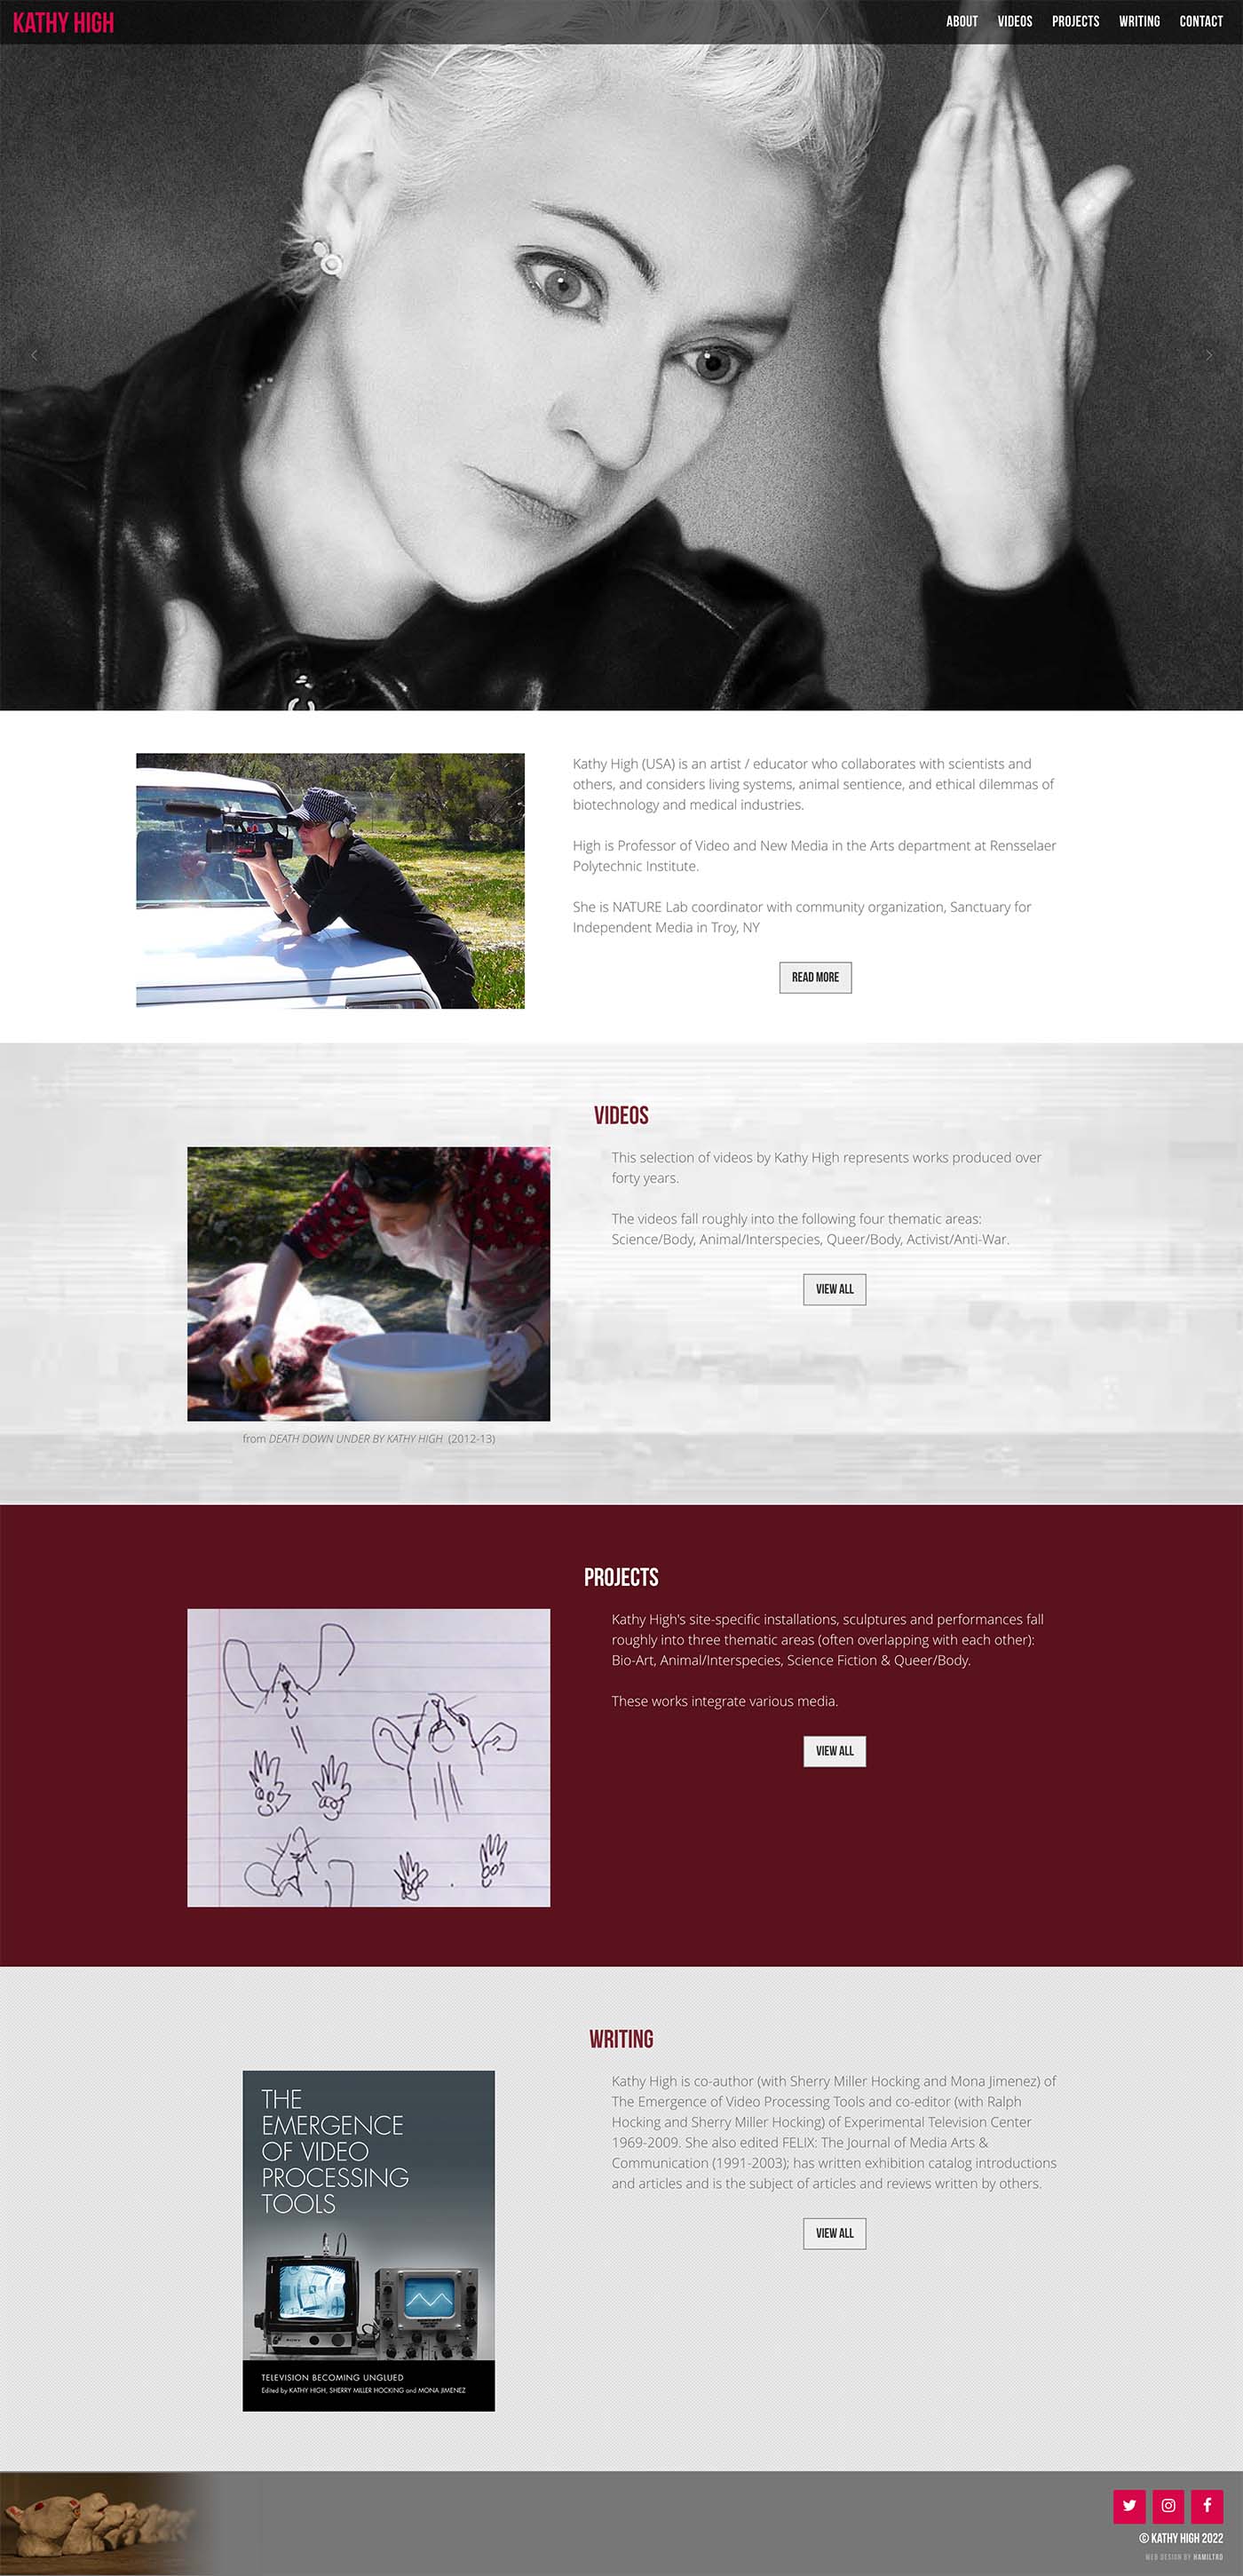 website design for a new media artist - Kathy High home page